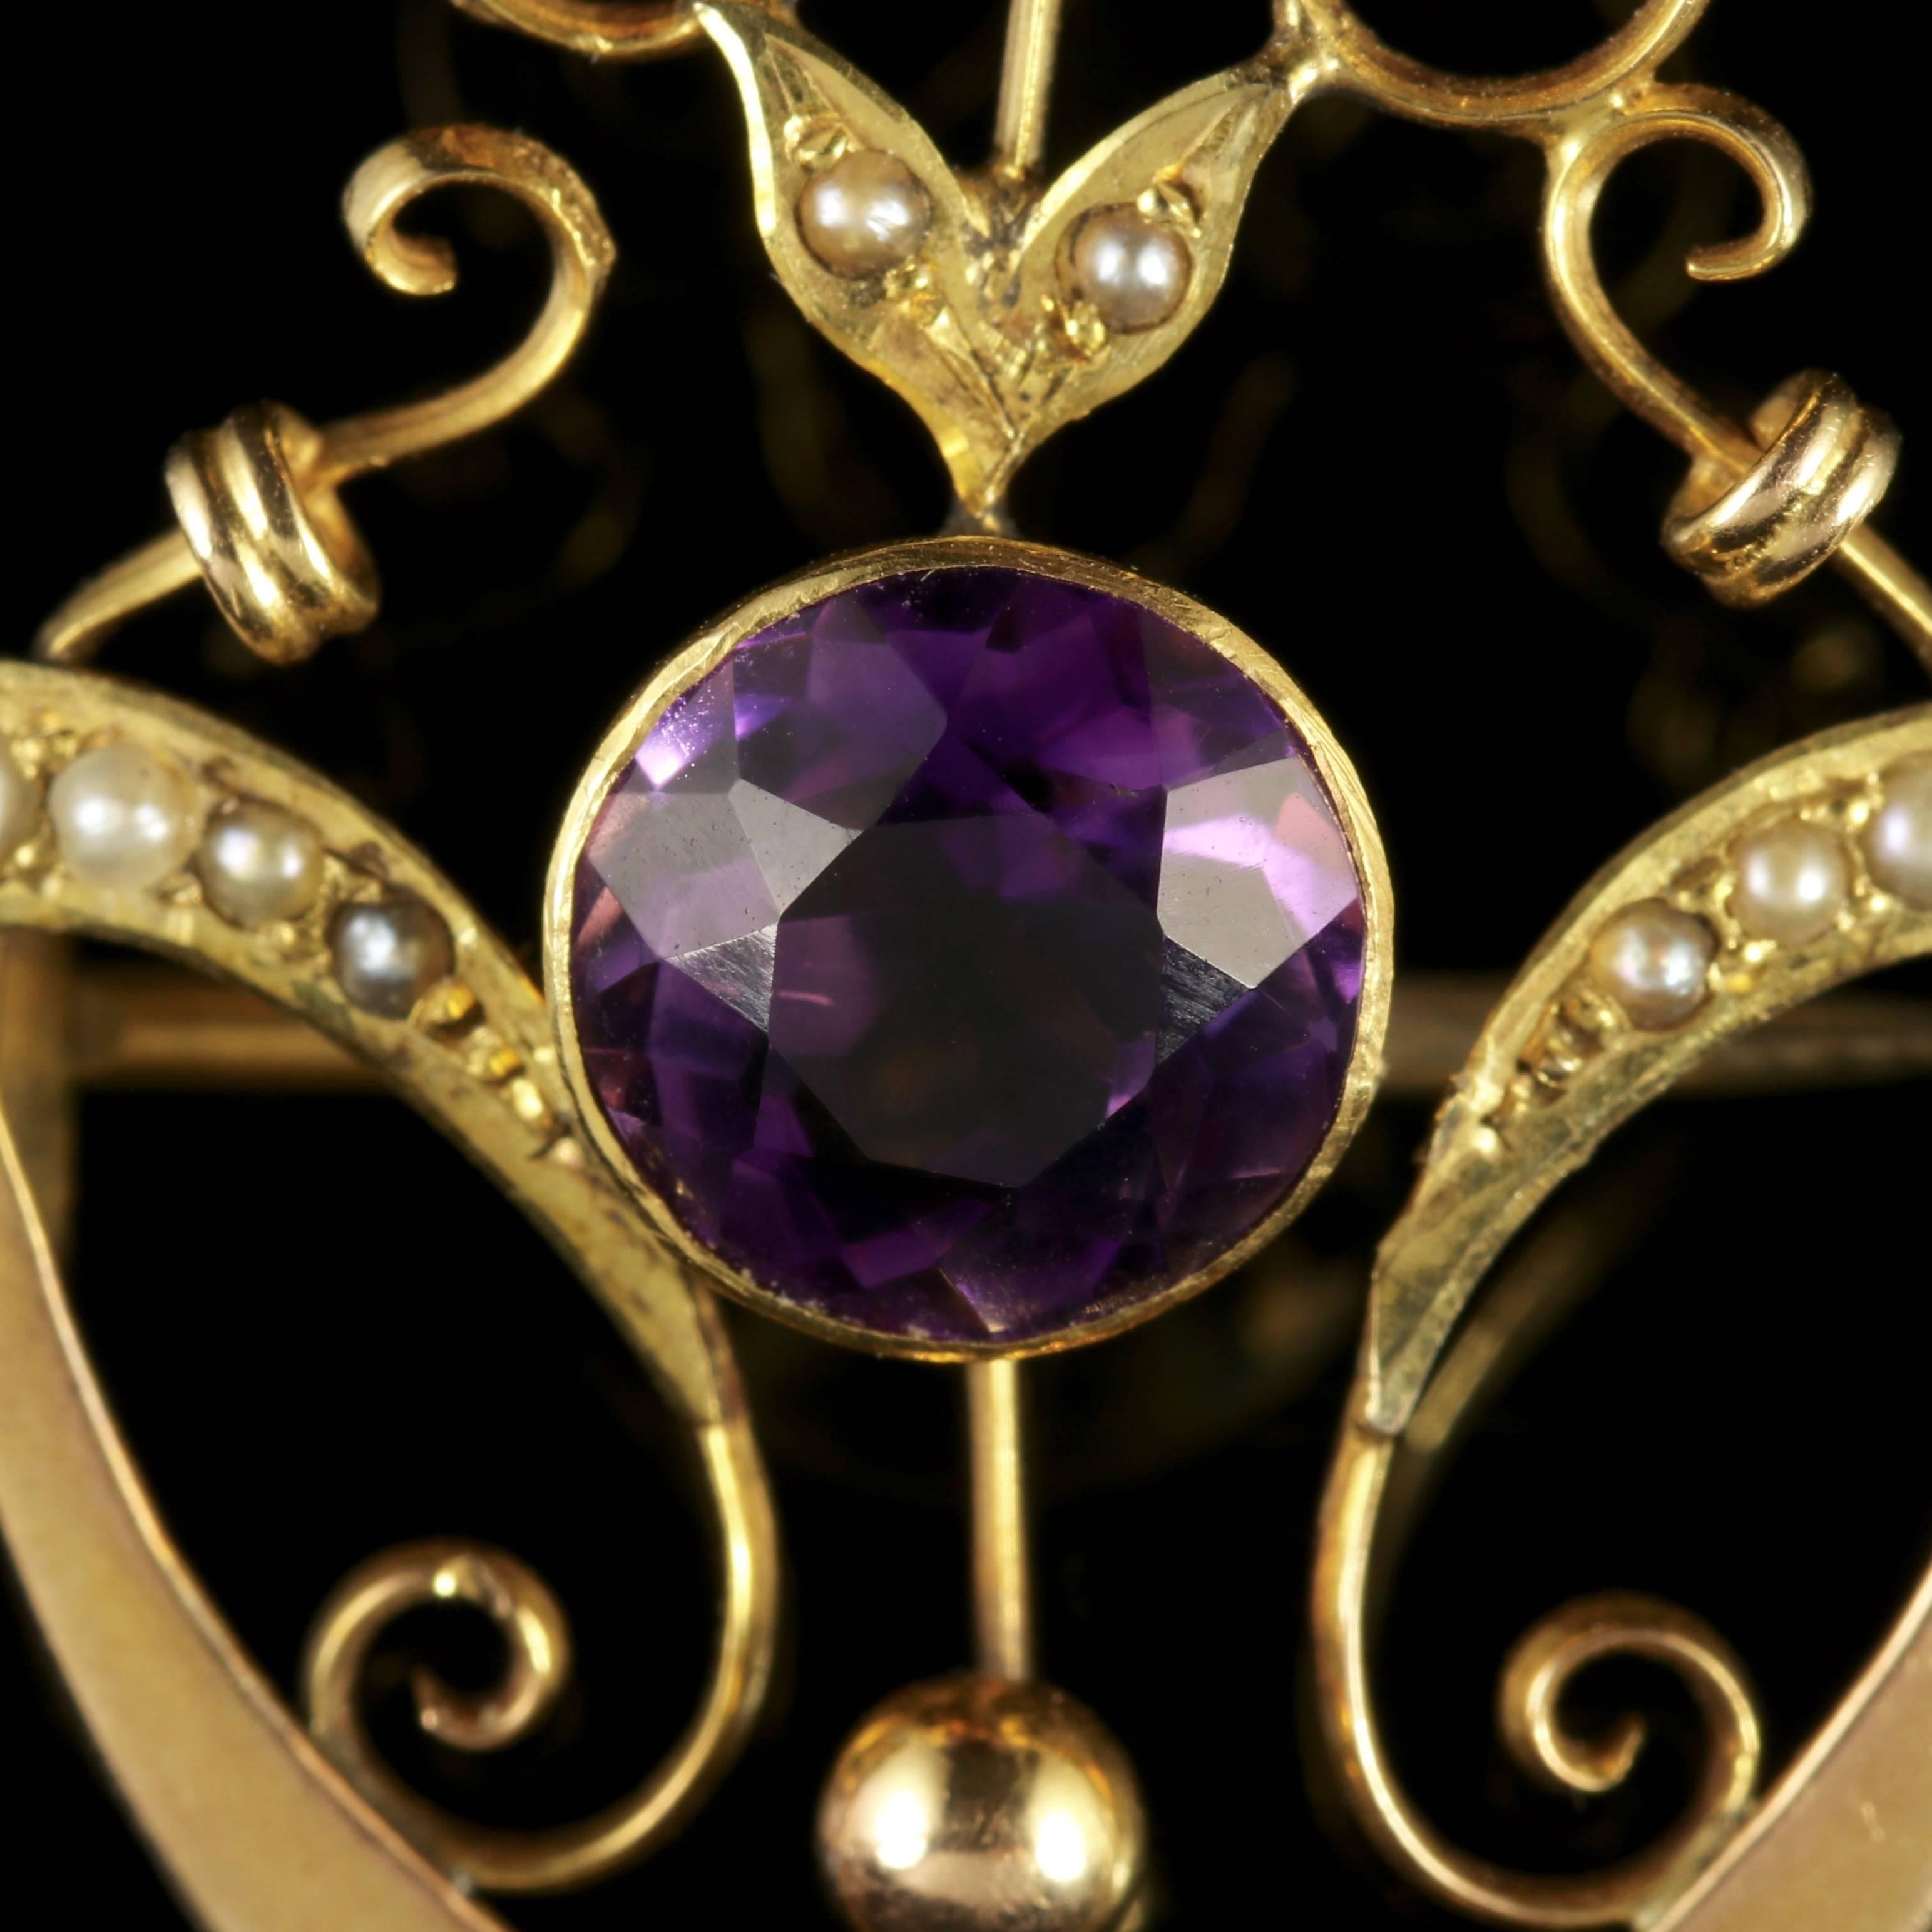 To read more please click continue reading below-

This fabulous antique 9ct Yellow Gold pendant brooch is genuine Victorian, Circa 1880. 

The pendant boasts two rich Purple Amethyst’s and is decorated in lovely Pearls. 

Amethyst has been highly